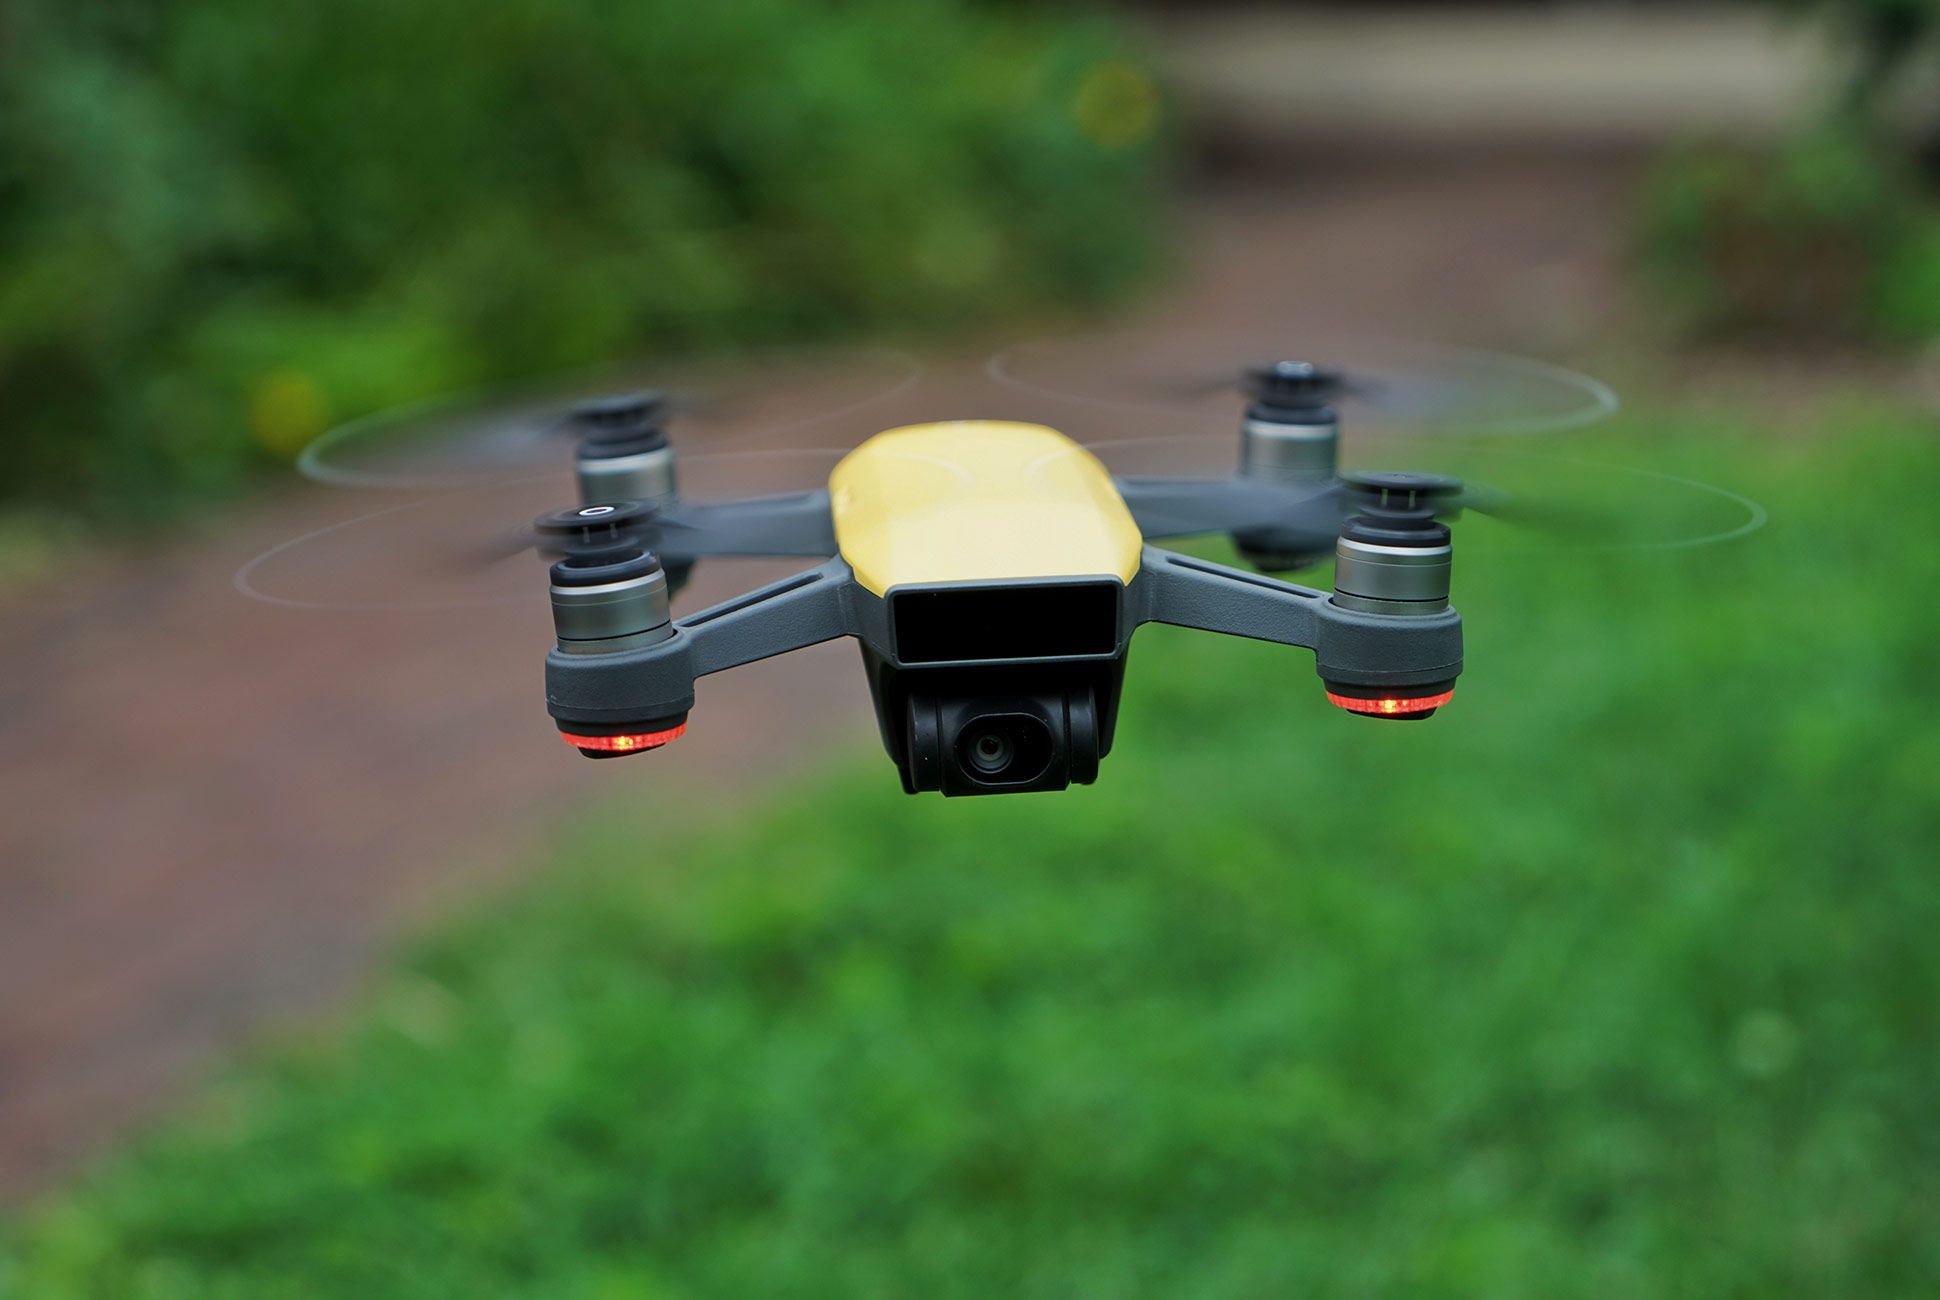 Arving Kapel Planet Review: DJI Spark, a Selfie Drone with an Eye on the Future - Gear Patrol